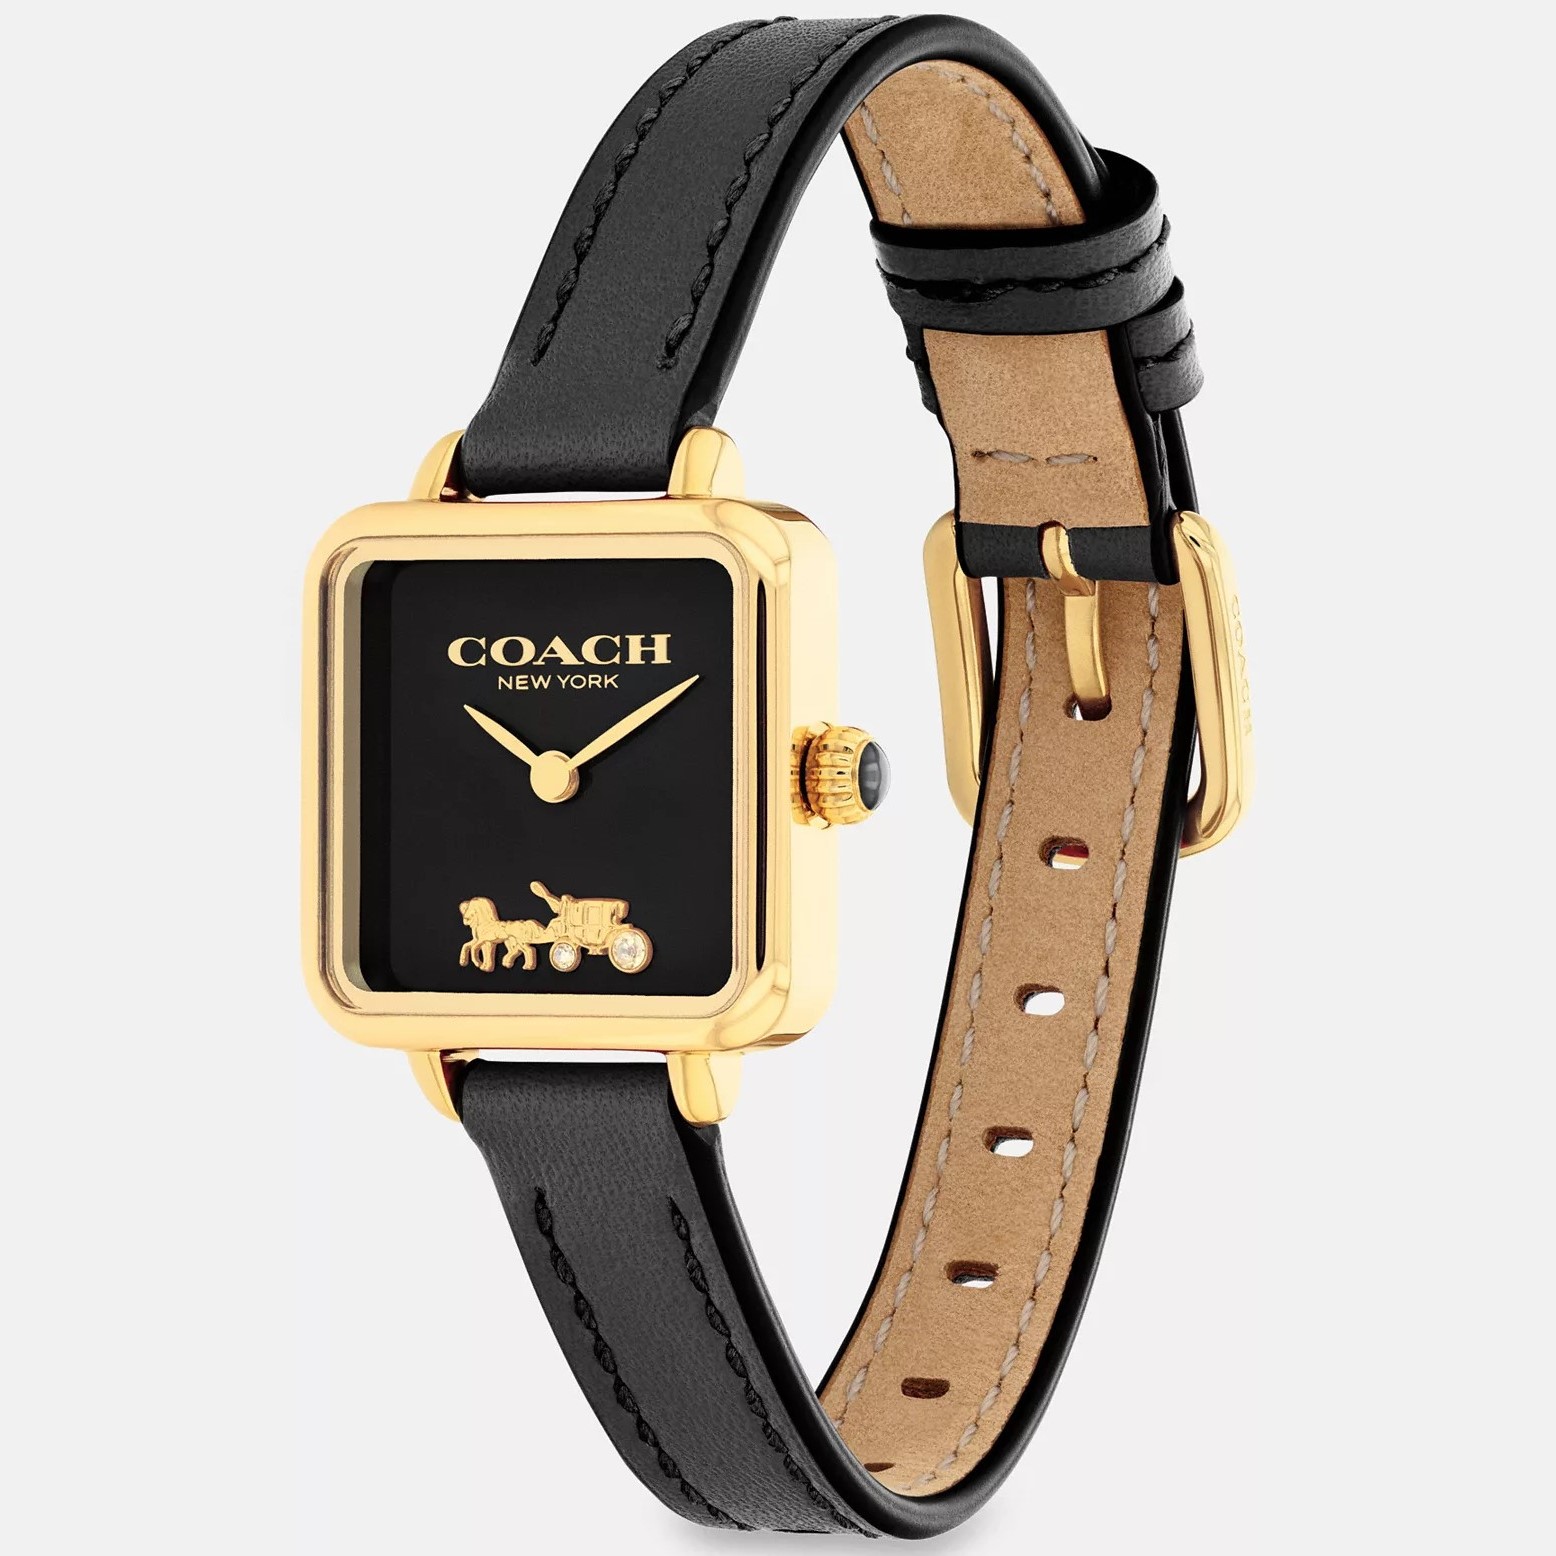 ĐỒNG HỒ NỮ COACH CASS SIGNATURE HORSE AND CARRIAGE ION-PLATED GOLDTONE STEEL AND BLACK LEATHER STRAP WATCH 14504225 1